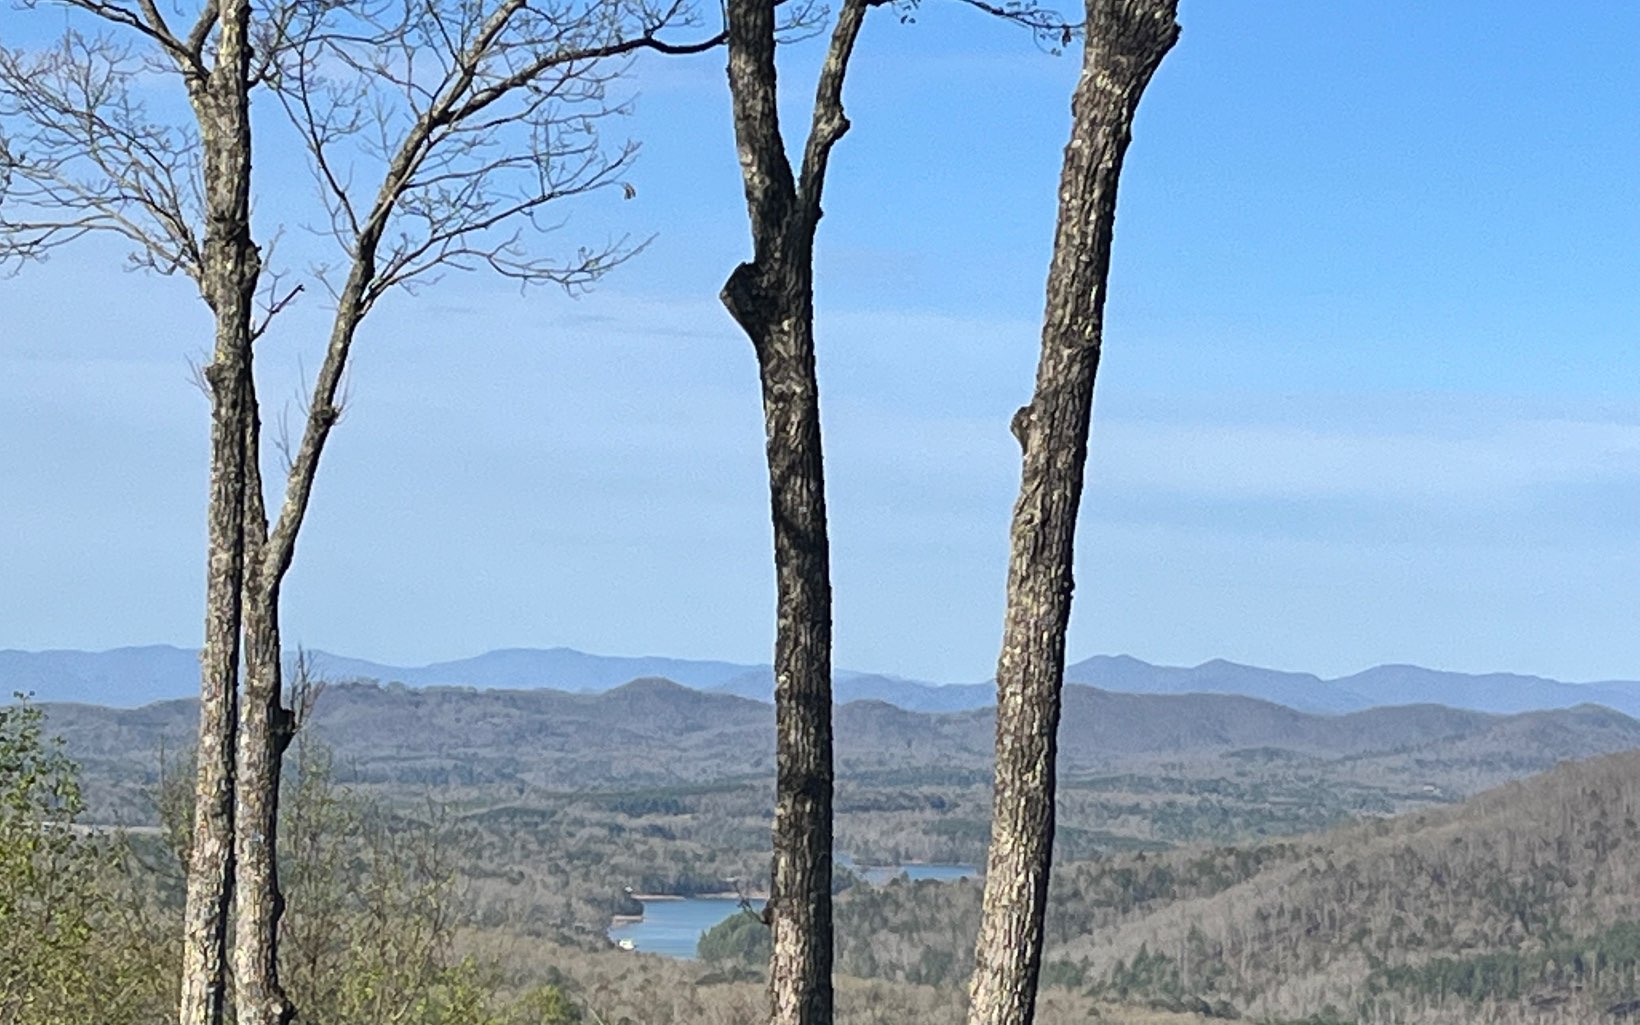 Check out this mountain top lot with potential amazing views of LAKE NOTTELY and surrounding NORTH GEORGIA MOUNTAINS in the beautiful community of Laurel Brooke. Come build your dream home and enjoy the peace and quiet of the mountains.